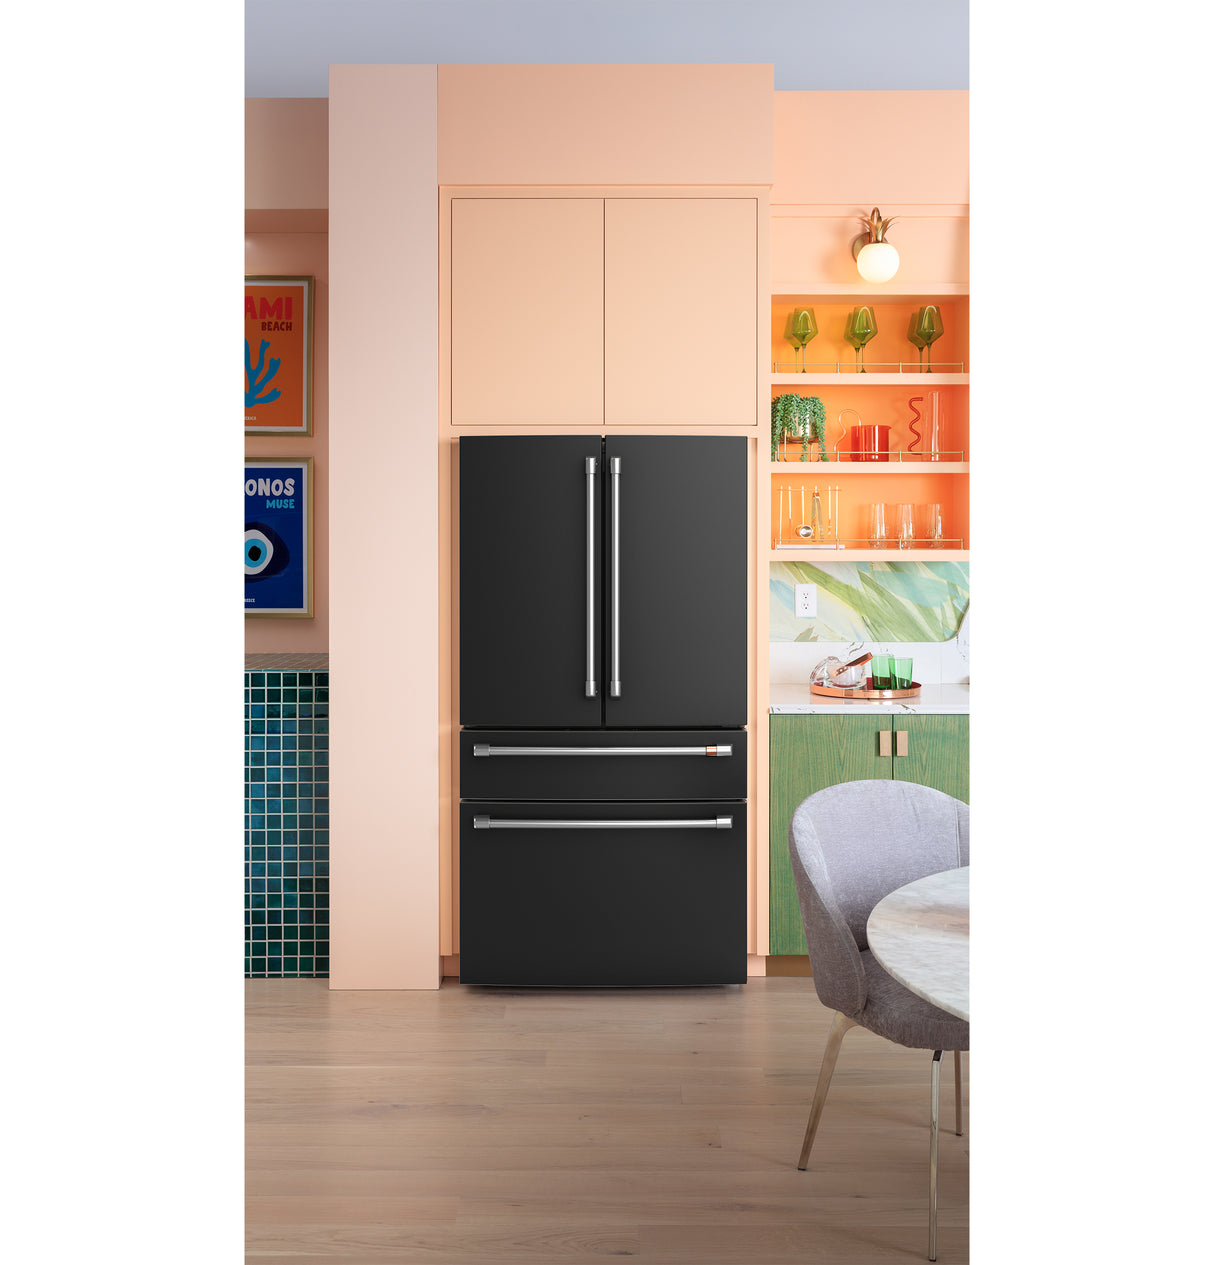 Caf(eback)(TM) ENERGY STAR(R) 28.7 Cu. Ft. Smart 4-Door French-Door Refrigerator With Dual-Dispense AutoFill Pitcher - (CGE29DP3TD1)